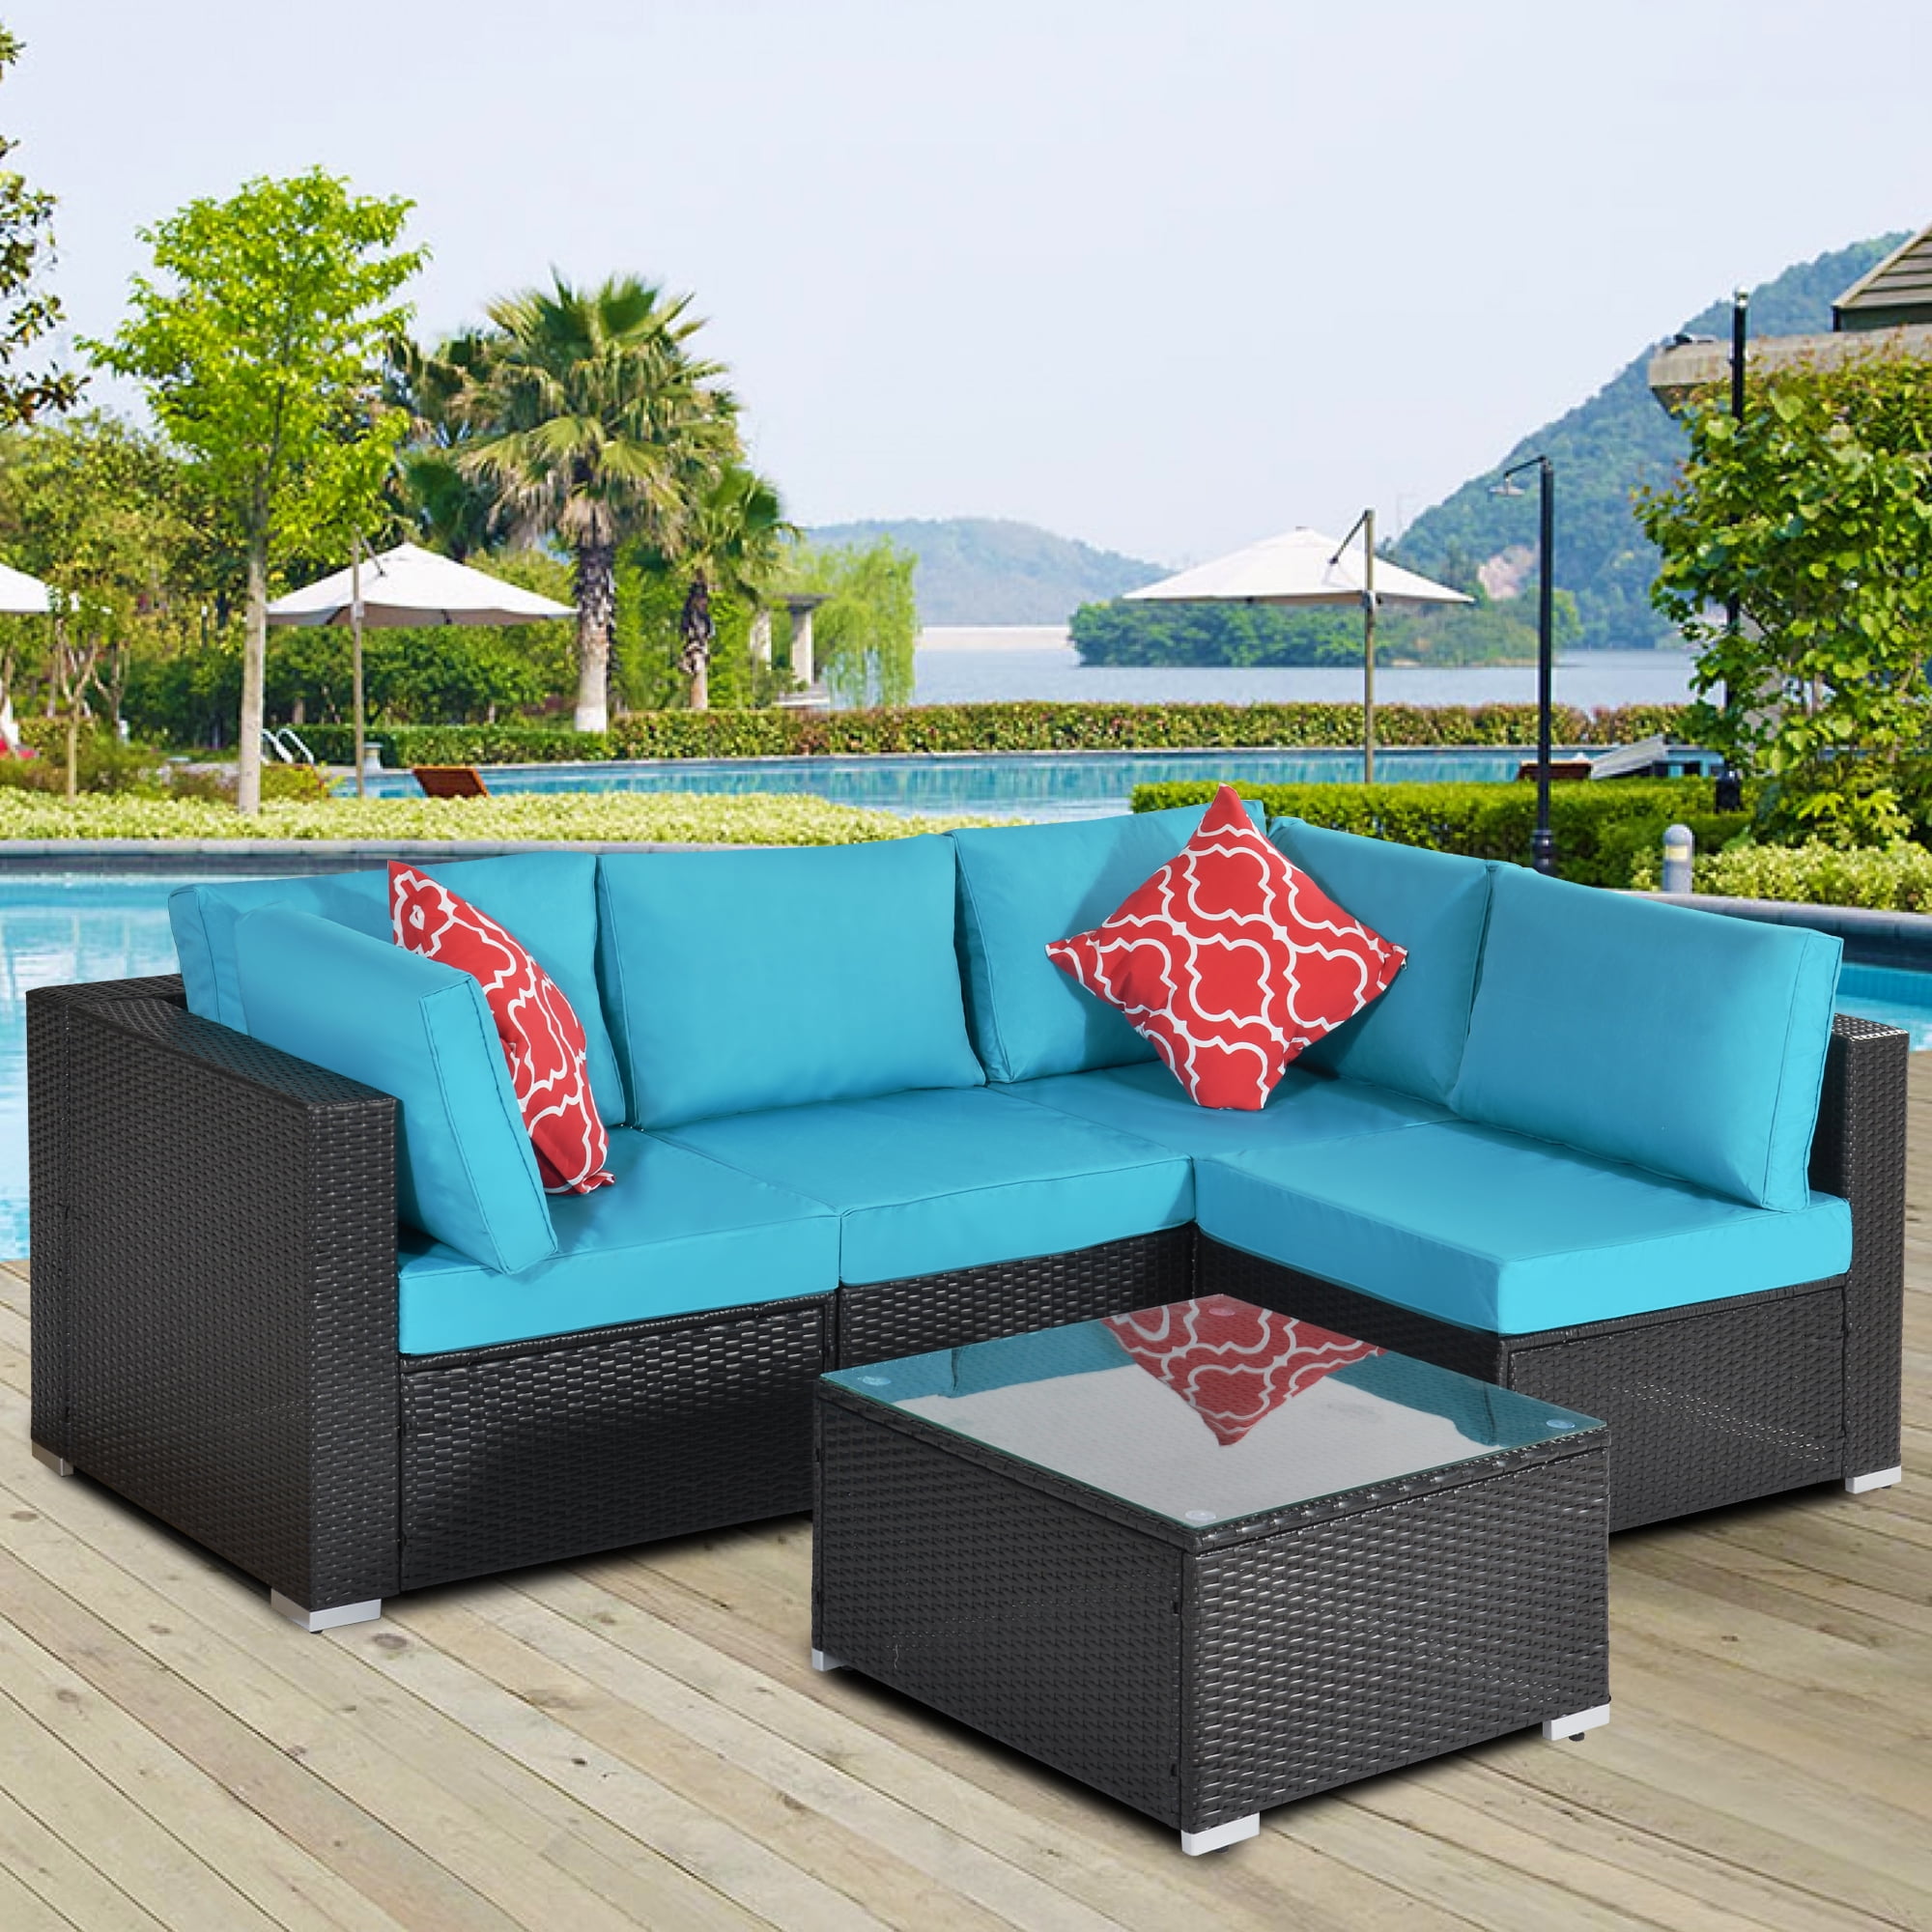 Patio Outdoor Furniture Sectional Sofa Set : Buy Outdoor Sofas, Chairs ...